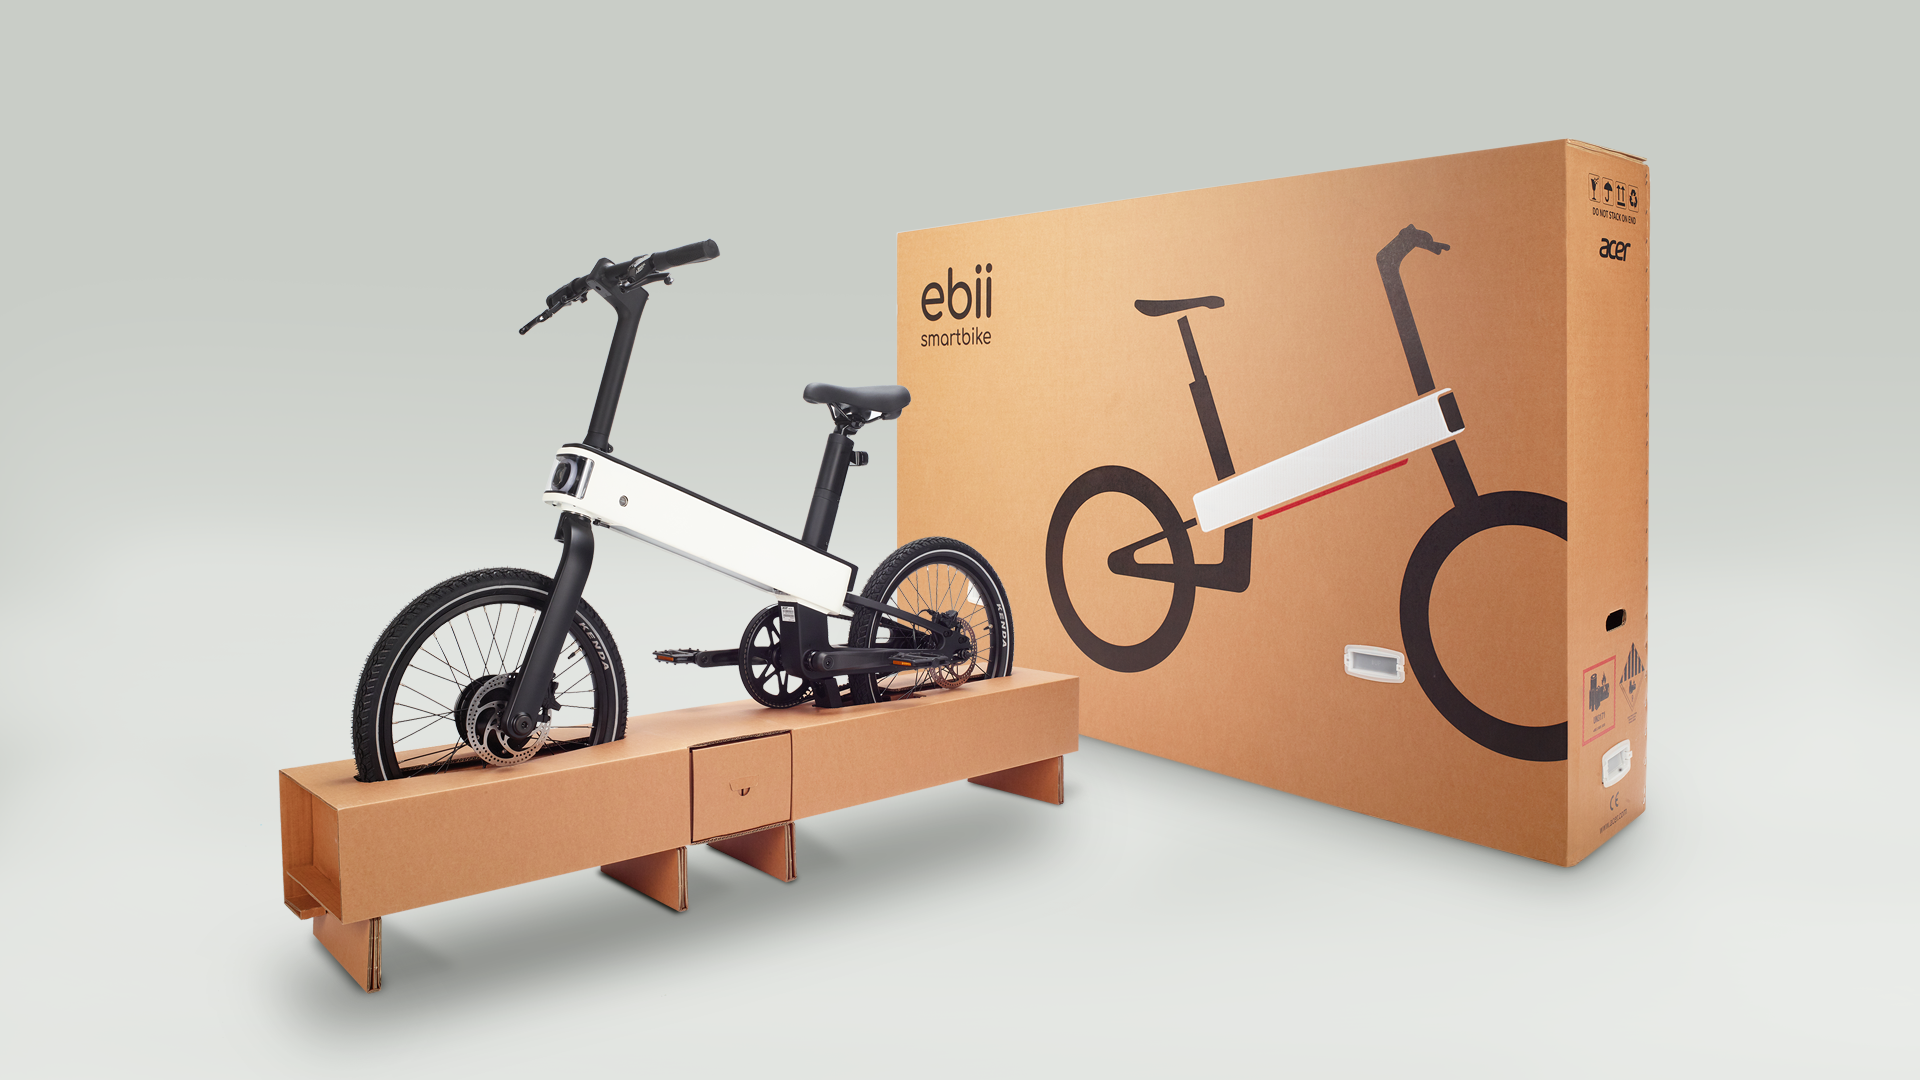 Acer ebii’s Packaging Encapsulates The Product’s Central Themes